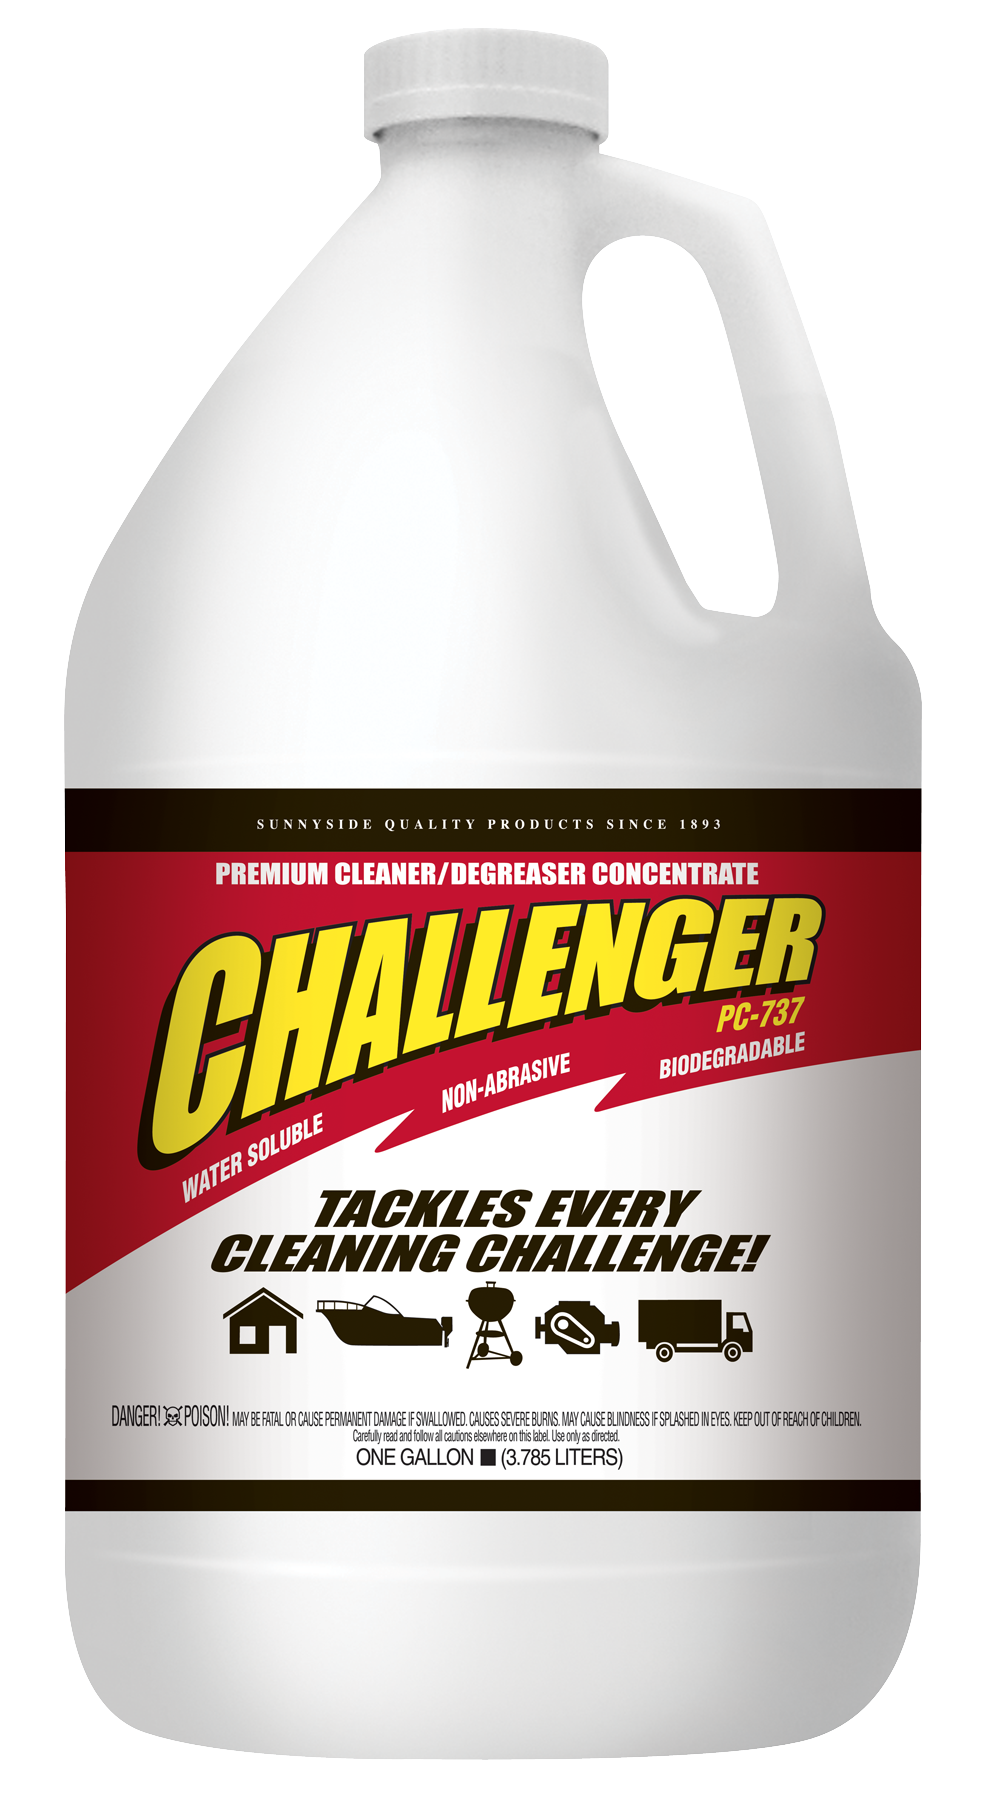 Challenger Product Image